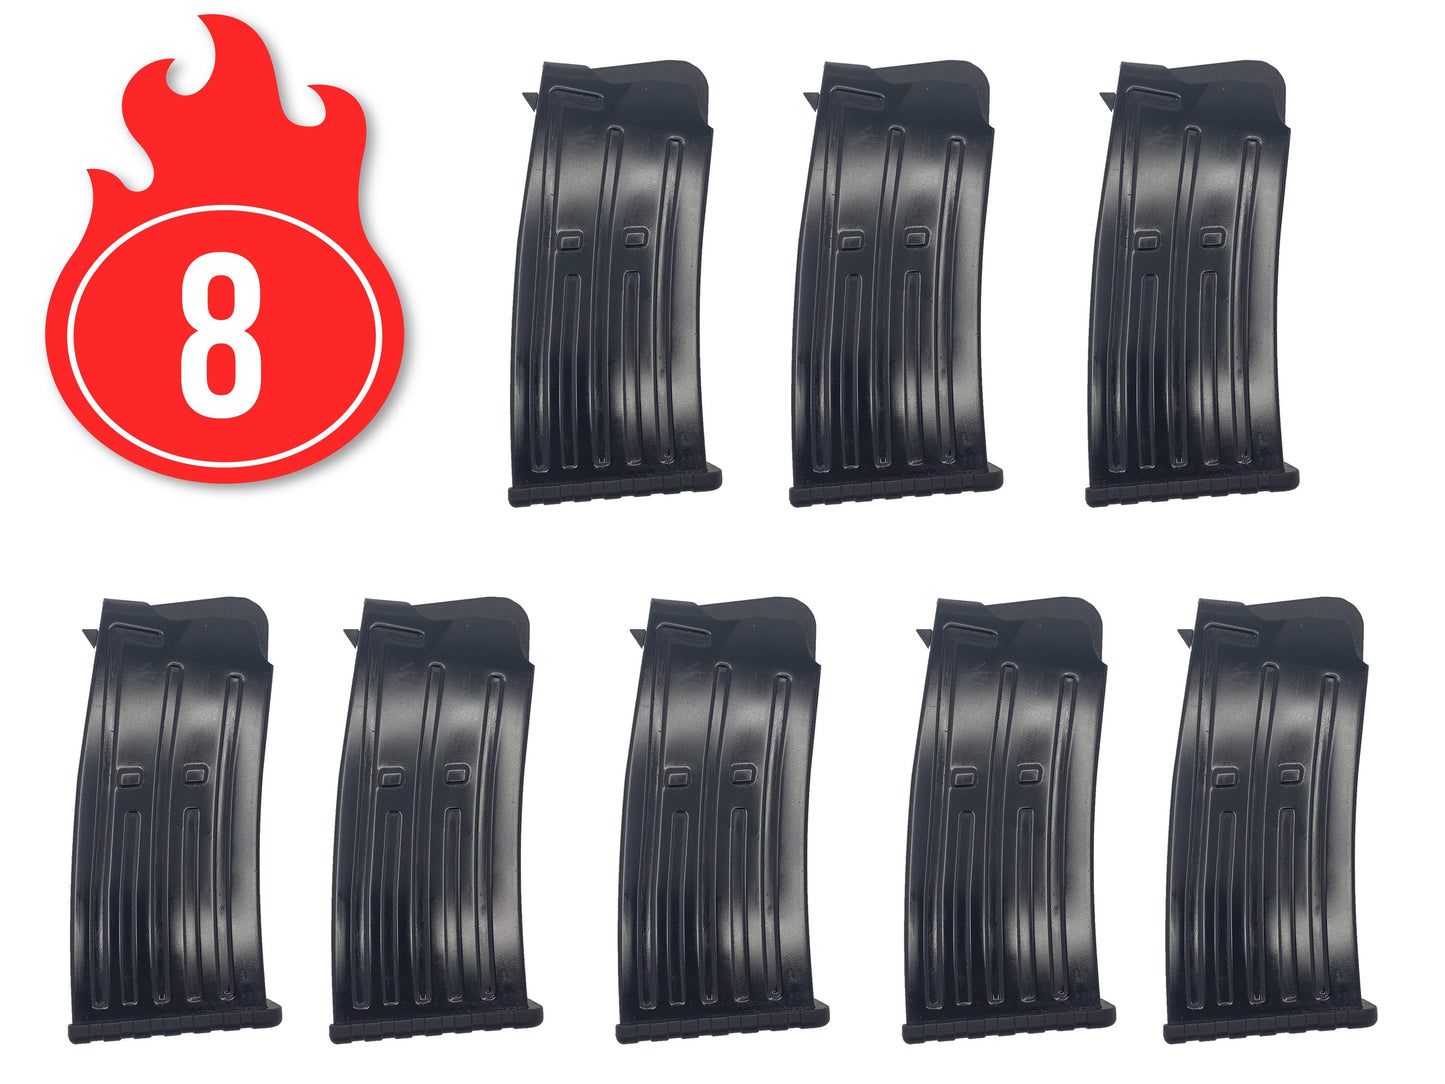 Emperor Firearms Seylan TM1950 -  5 Round Magazine | Buy More and Save